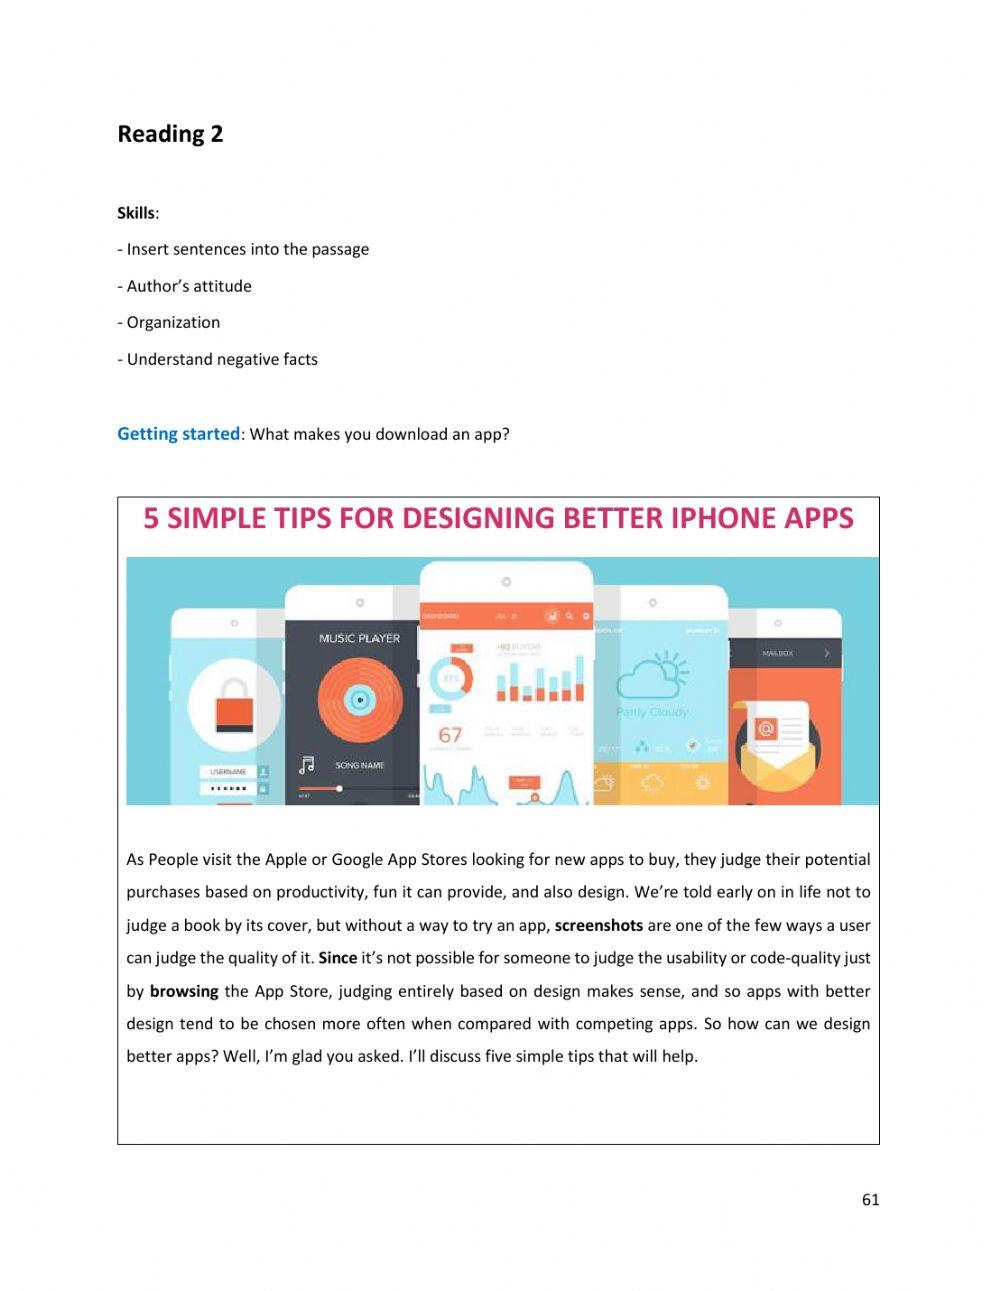 Unit 7 - Text 2 : 5  SIMPLE  TIPS  FOR  DESIGNING BETTER  IPHONE APPS